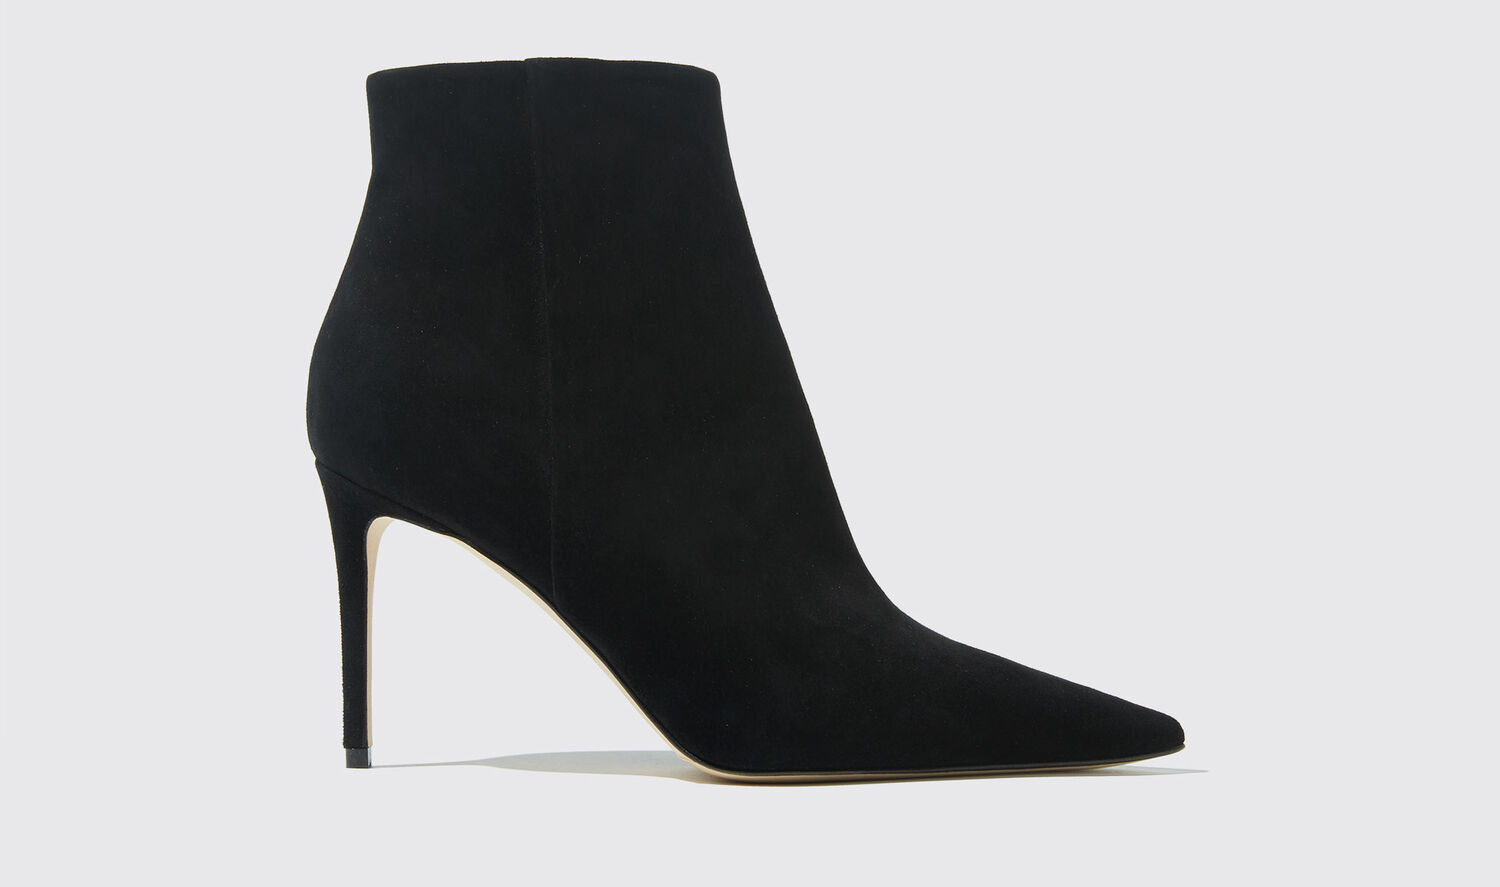 Scarosso Boots Anya Black Suede Suede Leather In Black - Suede